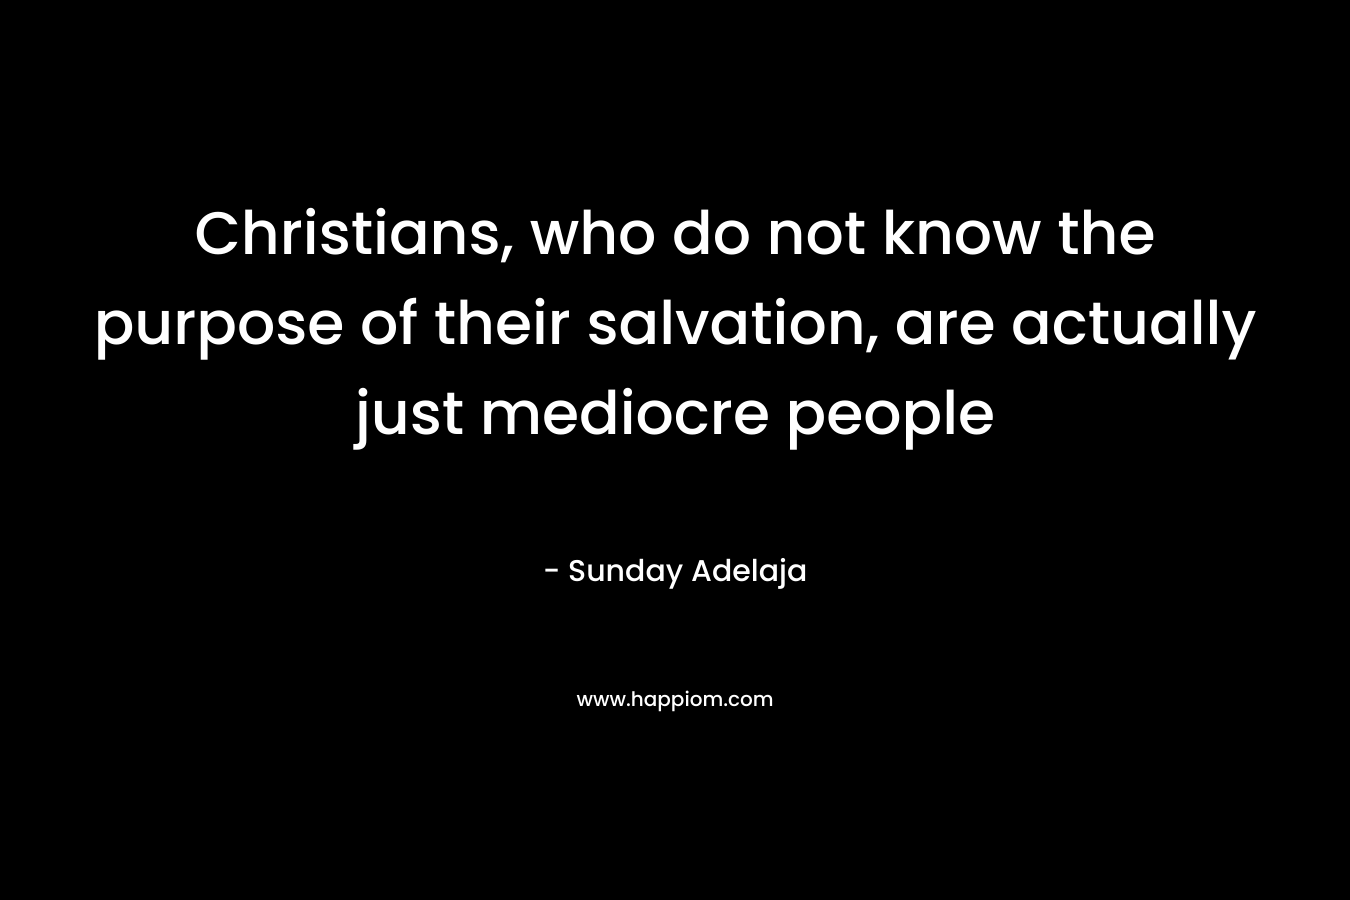 Christians, who do not know the purpose of their salvation, are actually just mediocre people